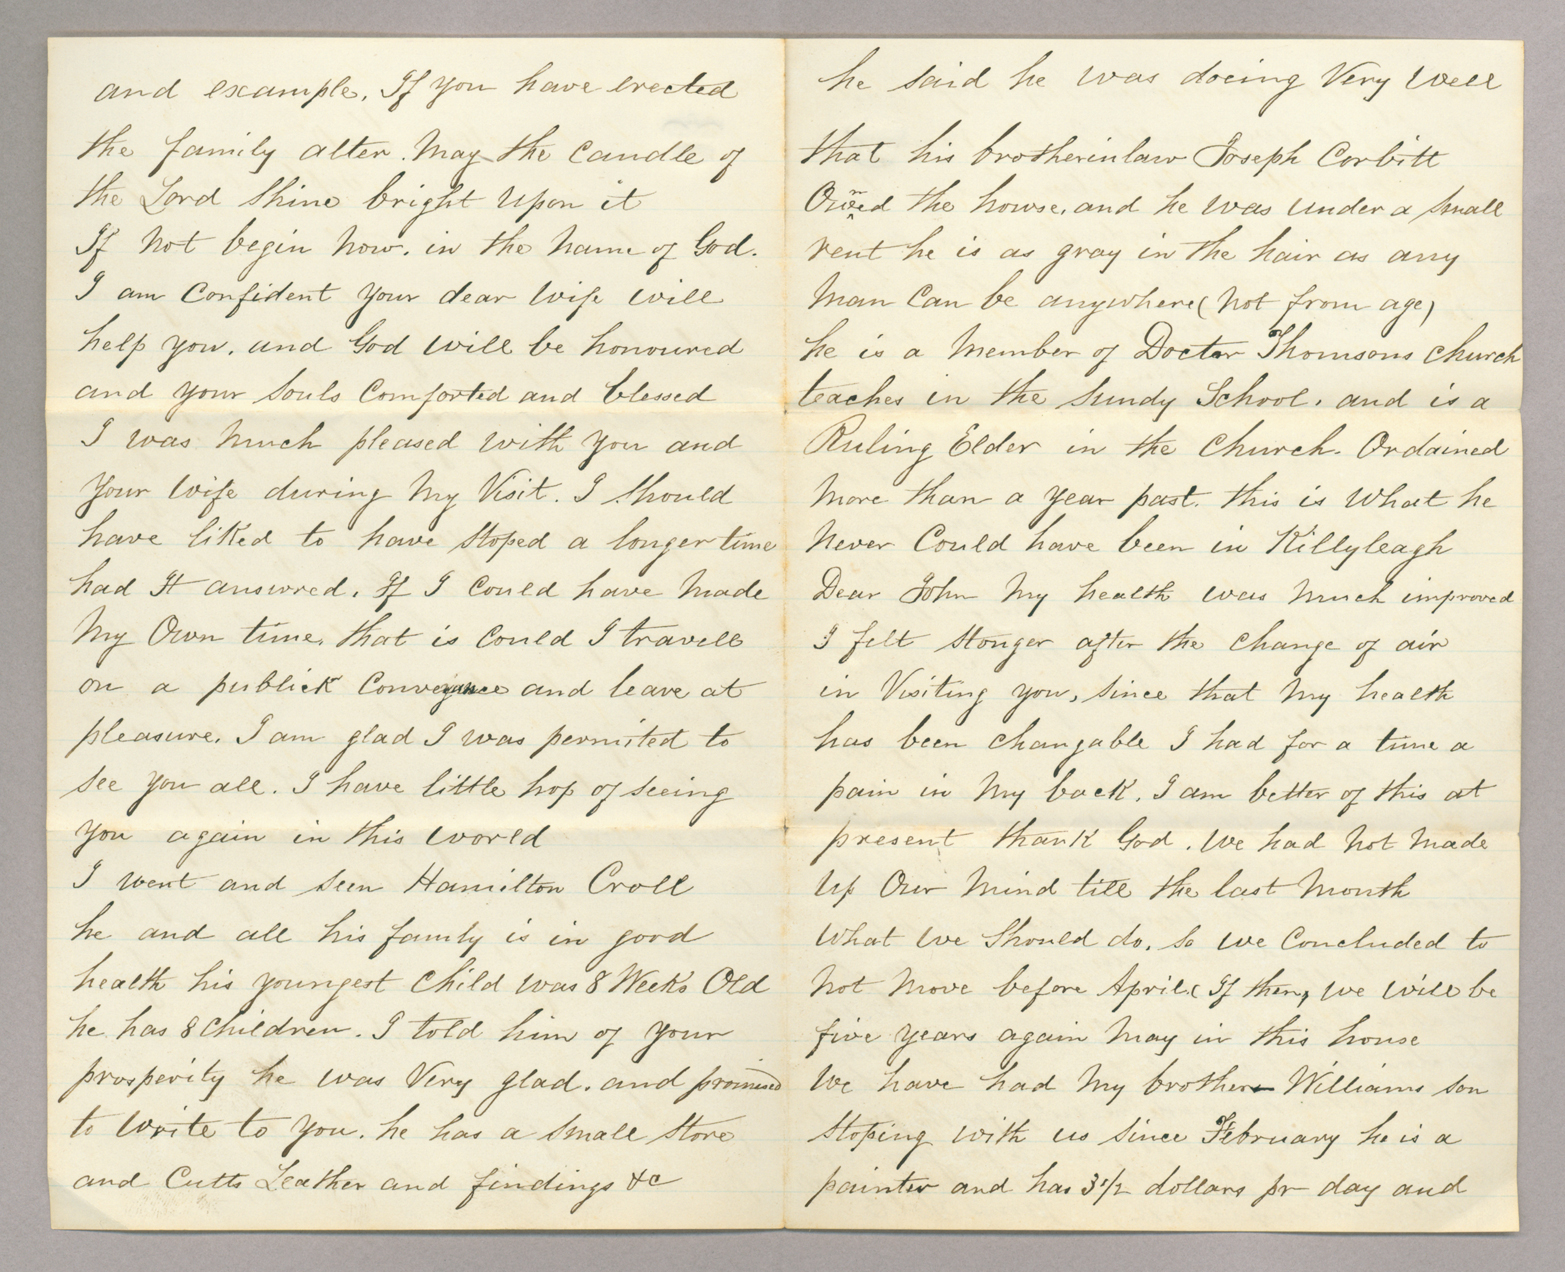 Letter. James Stott, New York, New York, to "My dear friend John" [John E. Brownlee], n. p., Pages 2-3